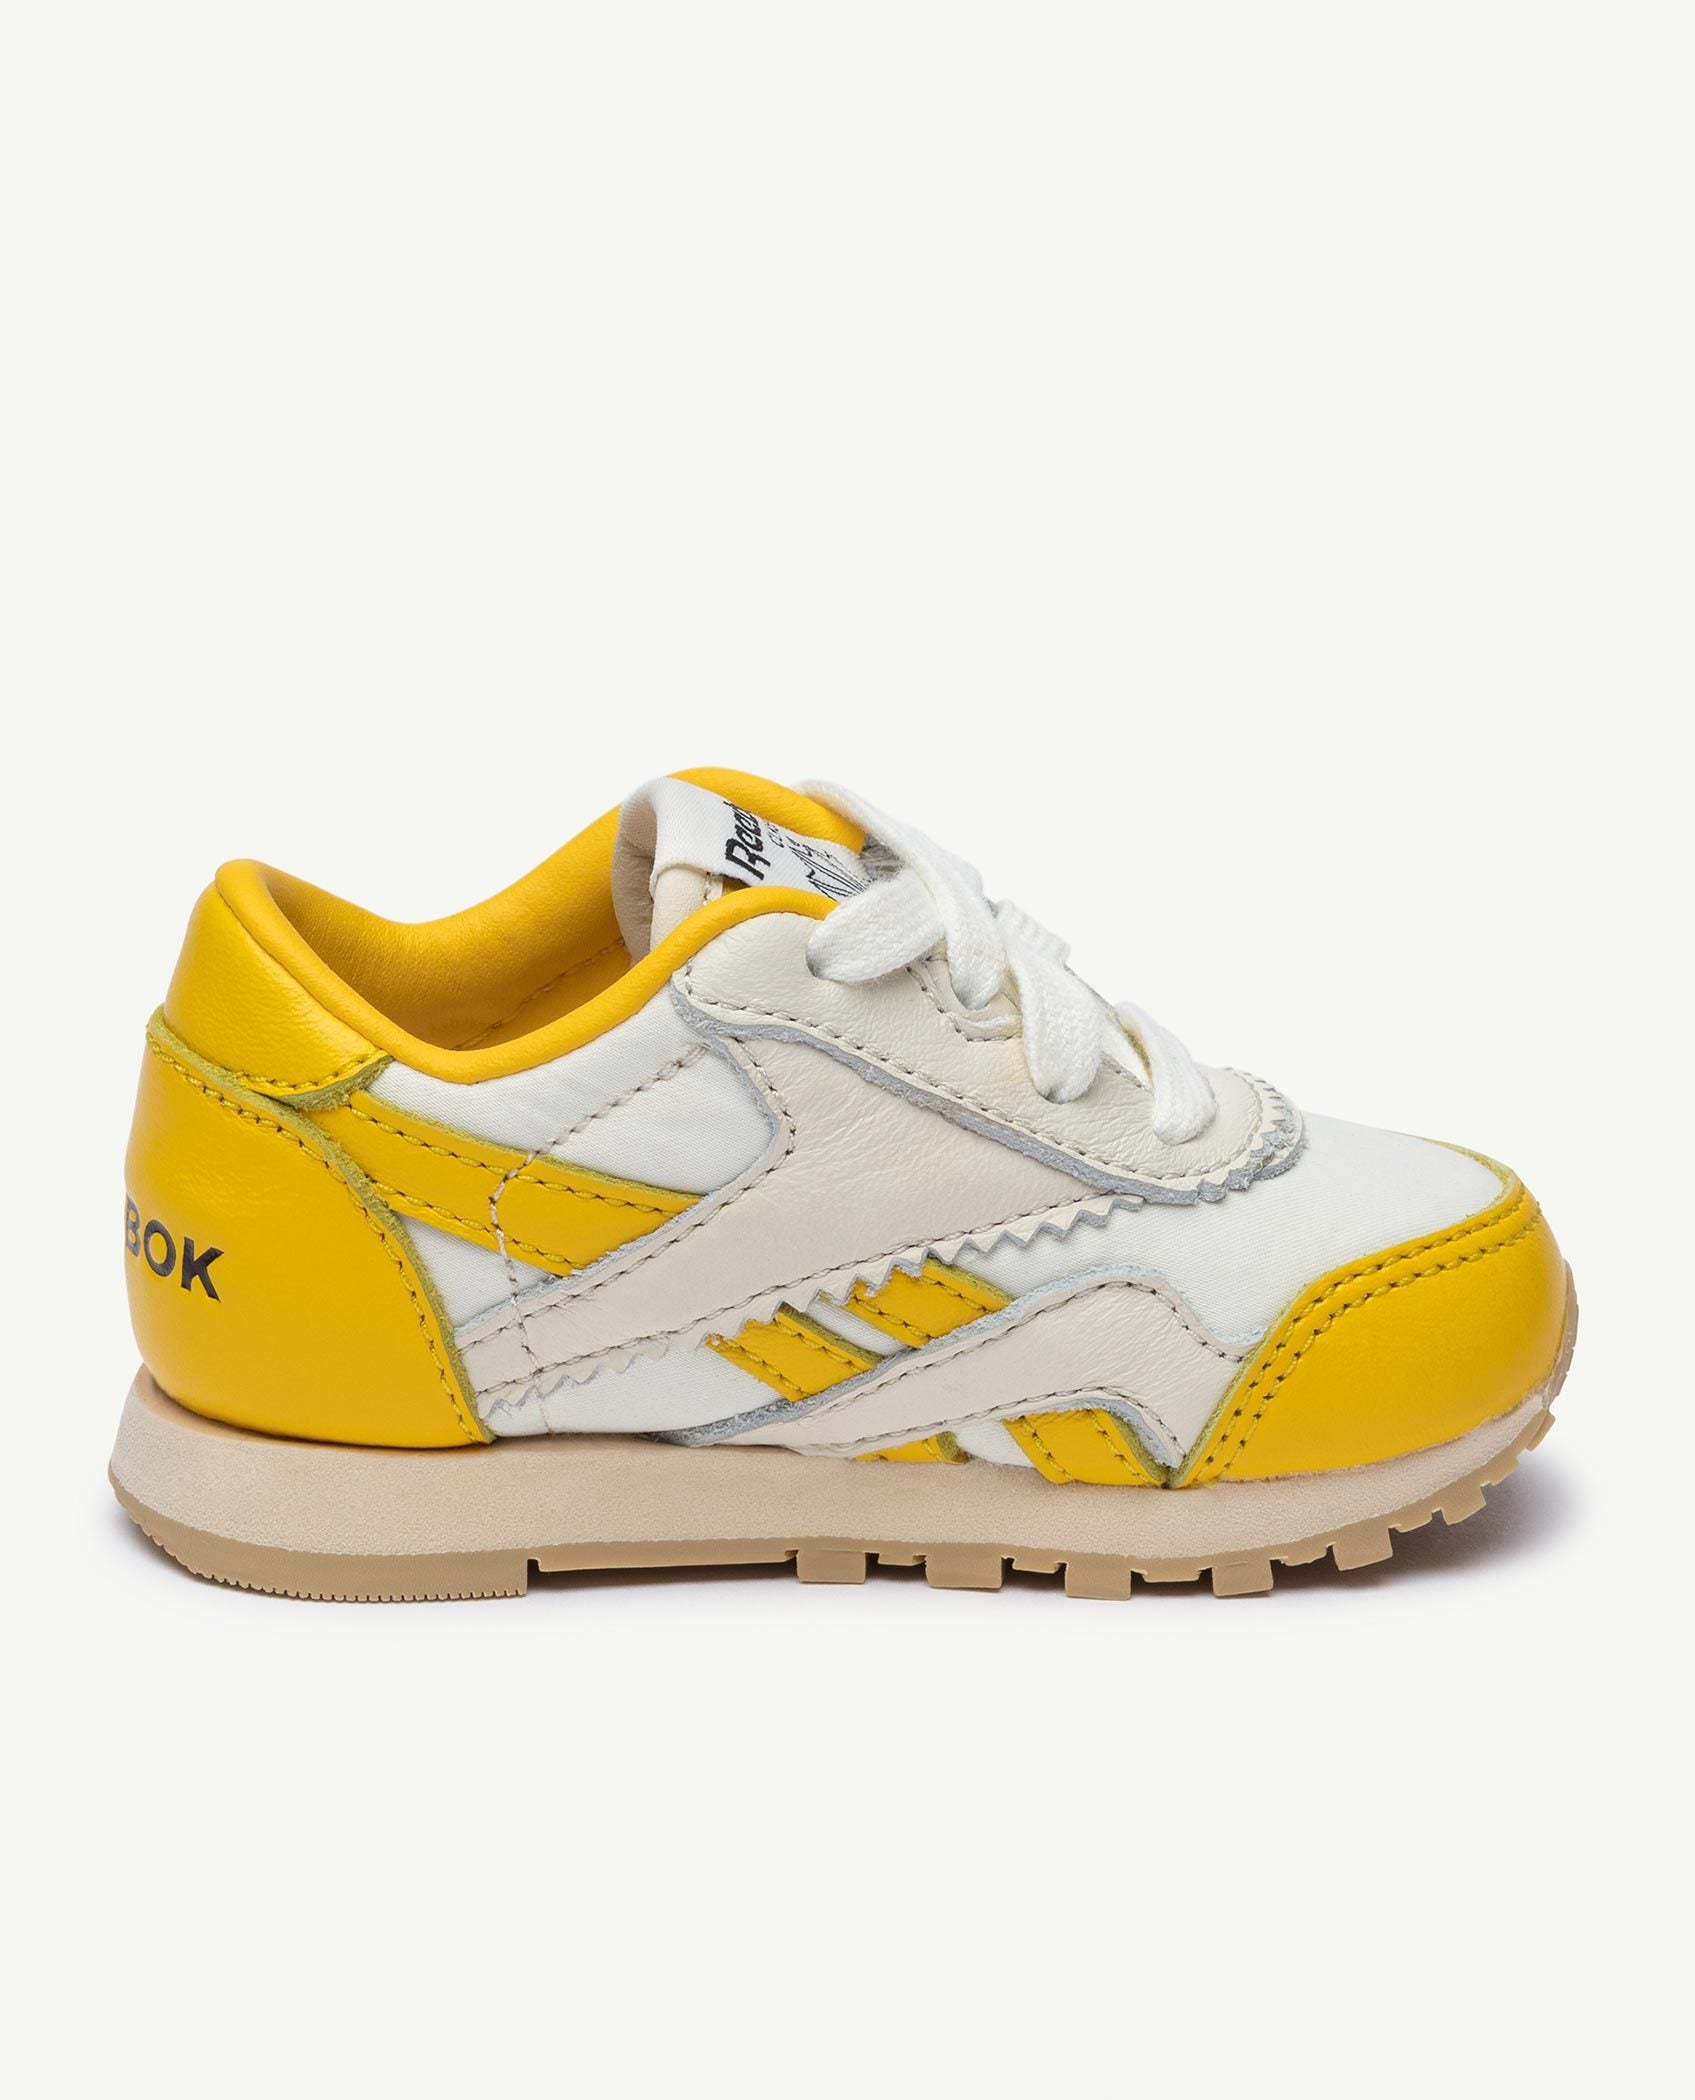 Reebok x The Animals Observatory Classic Nylon Yellow Baby PRODUCT BACK